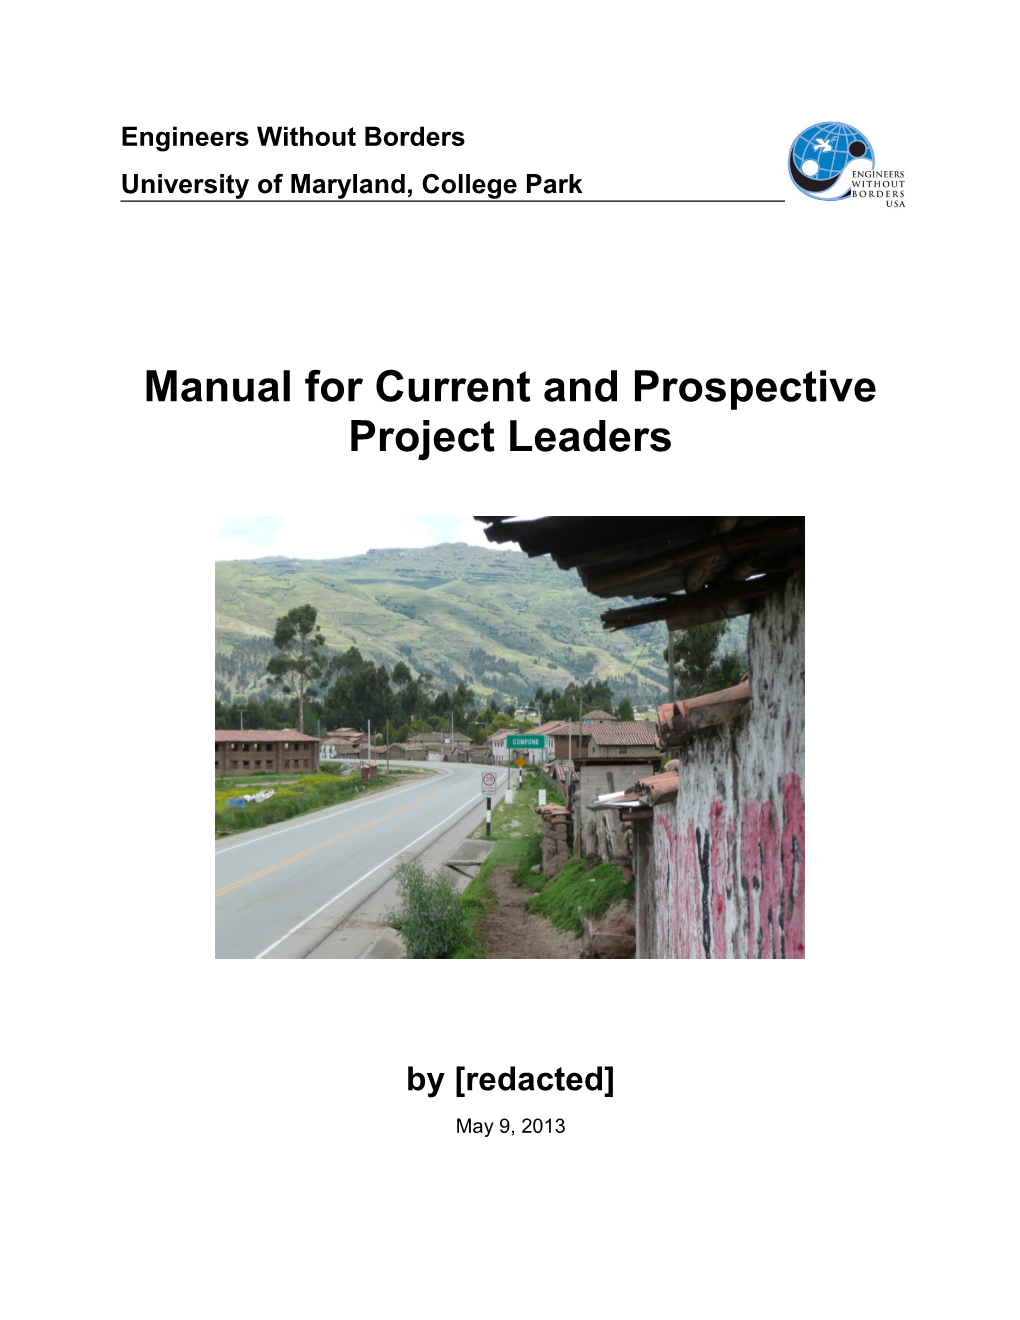 Manual for Current and Prospective Project Leaders